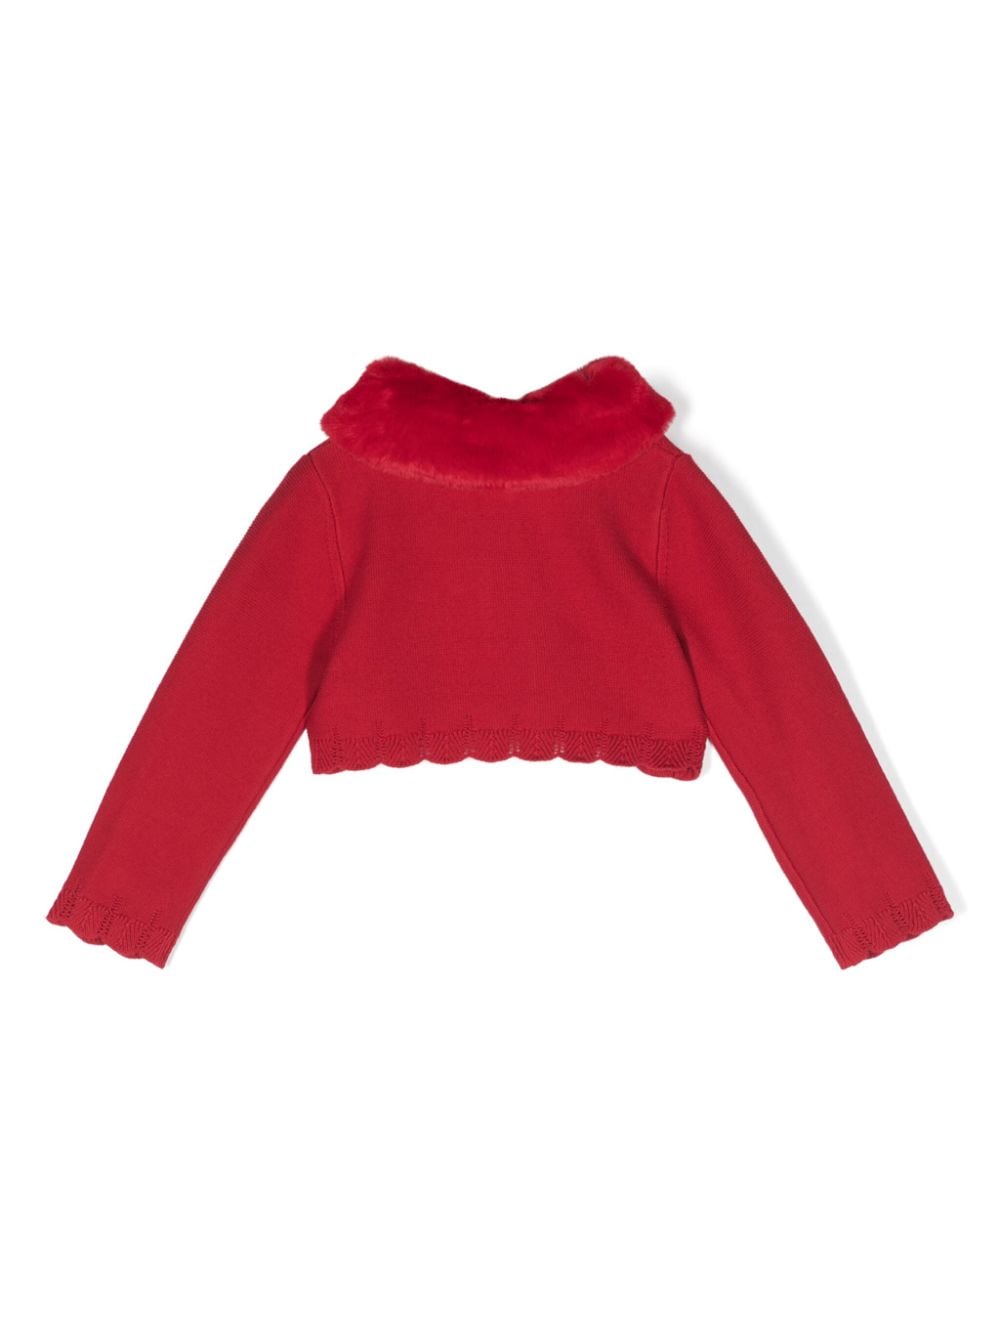 Red cardigan for baby girls with fur collar